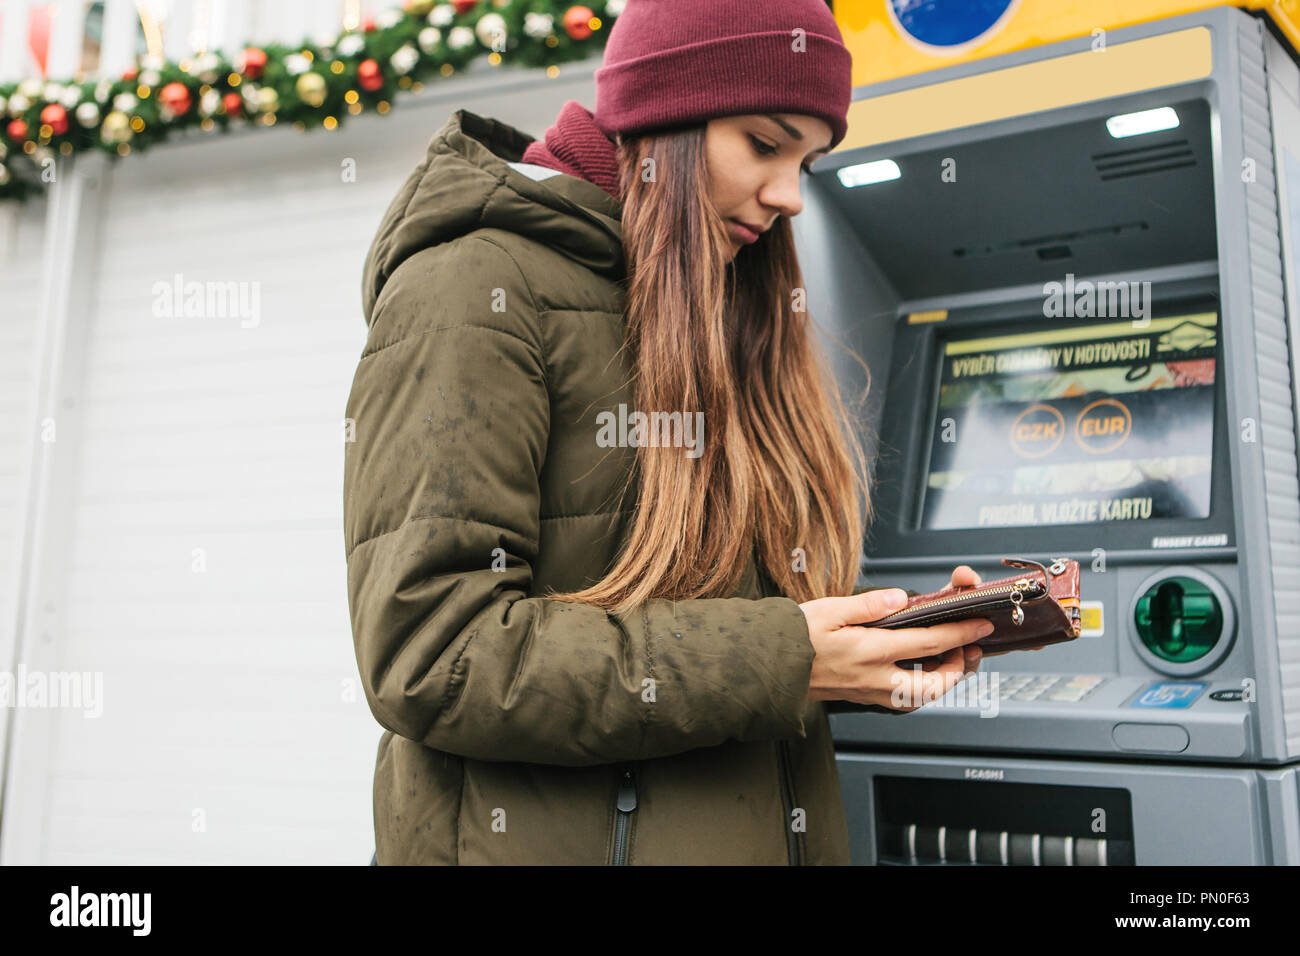 A young woman tourist or girl takes money from an ATM in Prague in the Czech Republic during the Christmas holidays for further tourism around the city. Stock Photo